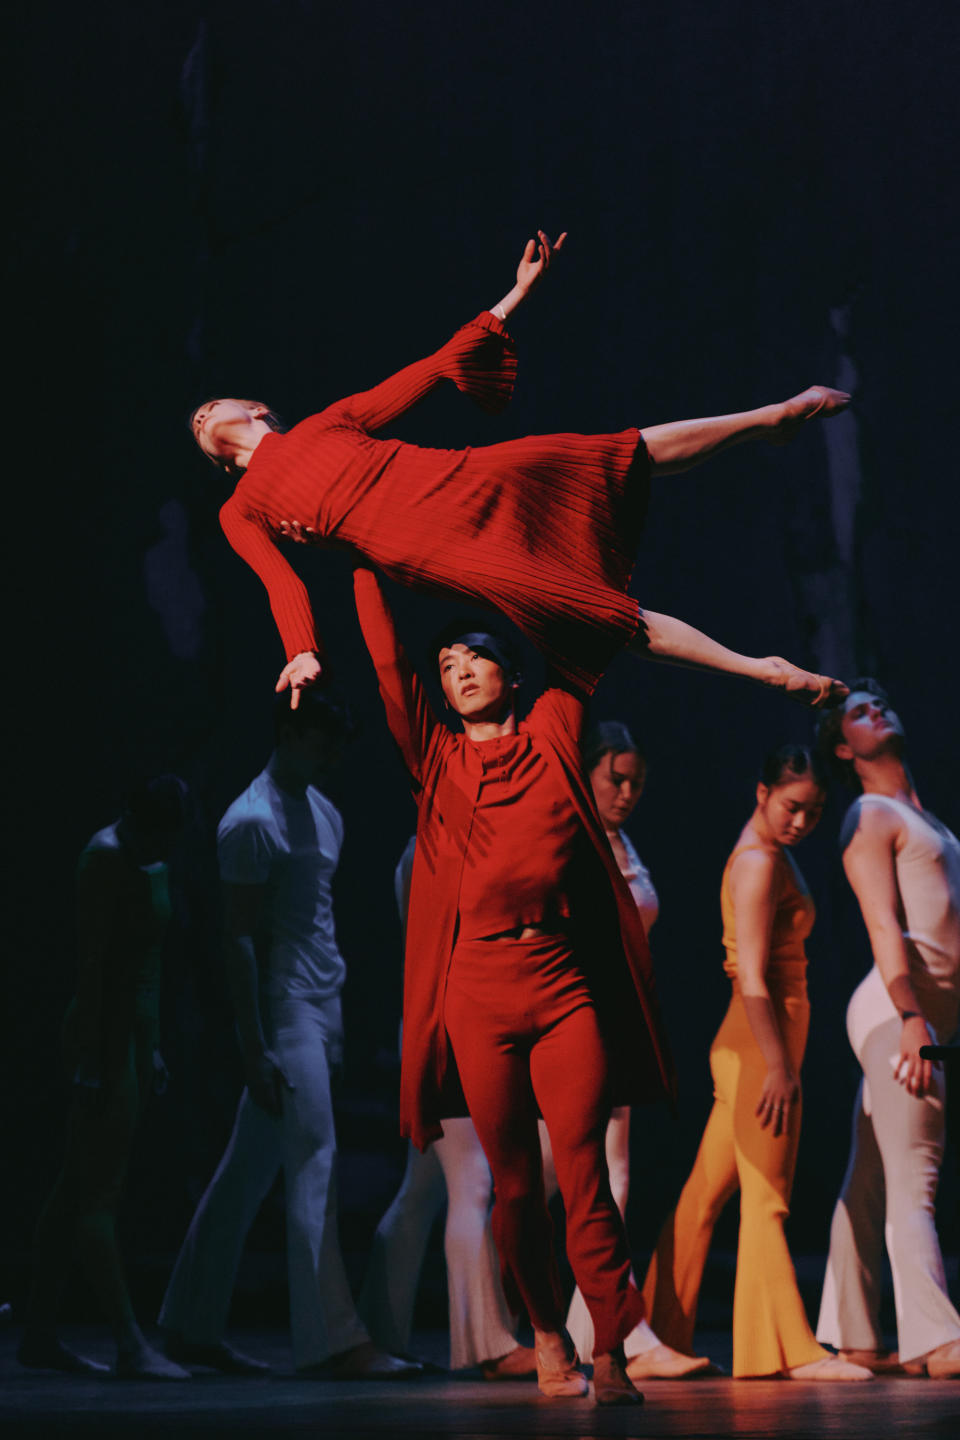 A rehearsal of the ballet Carmen featuring costumes designed by Gabriela Hearst.